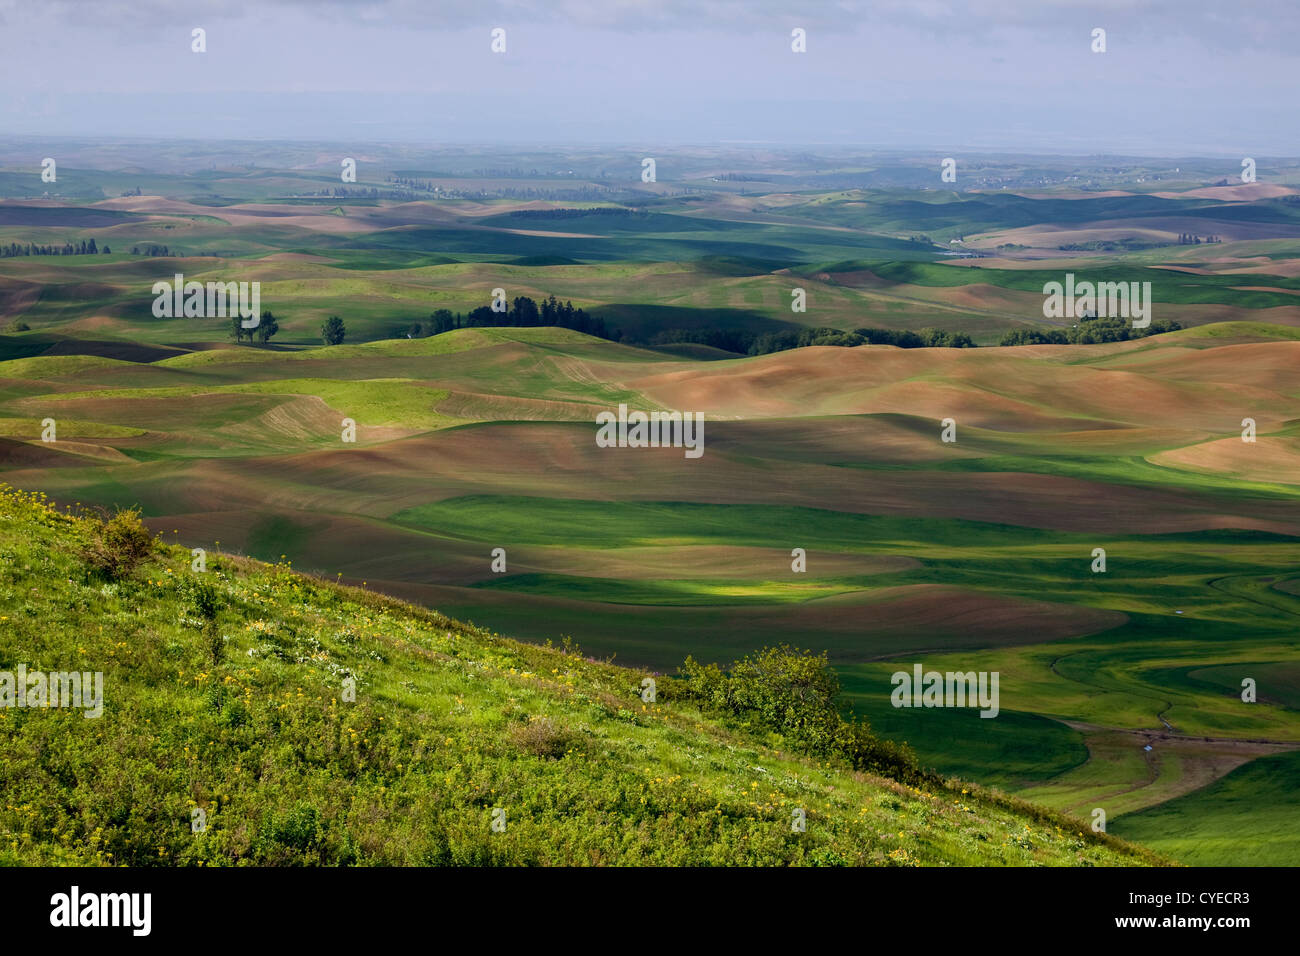 WA05491-00...WASHINGTON - View over the farm covered rolling hills of the Palouse from Steptoe Butte State Park. Stock Photo